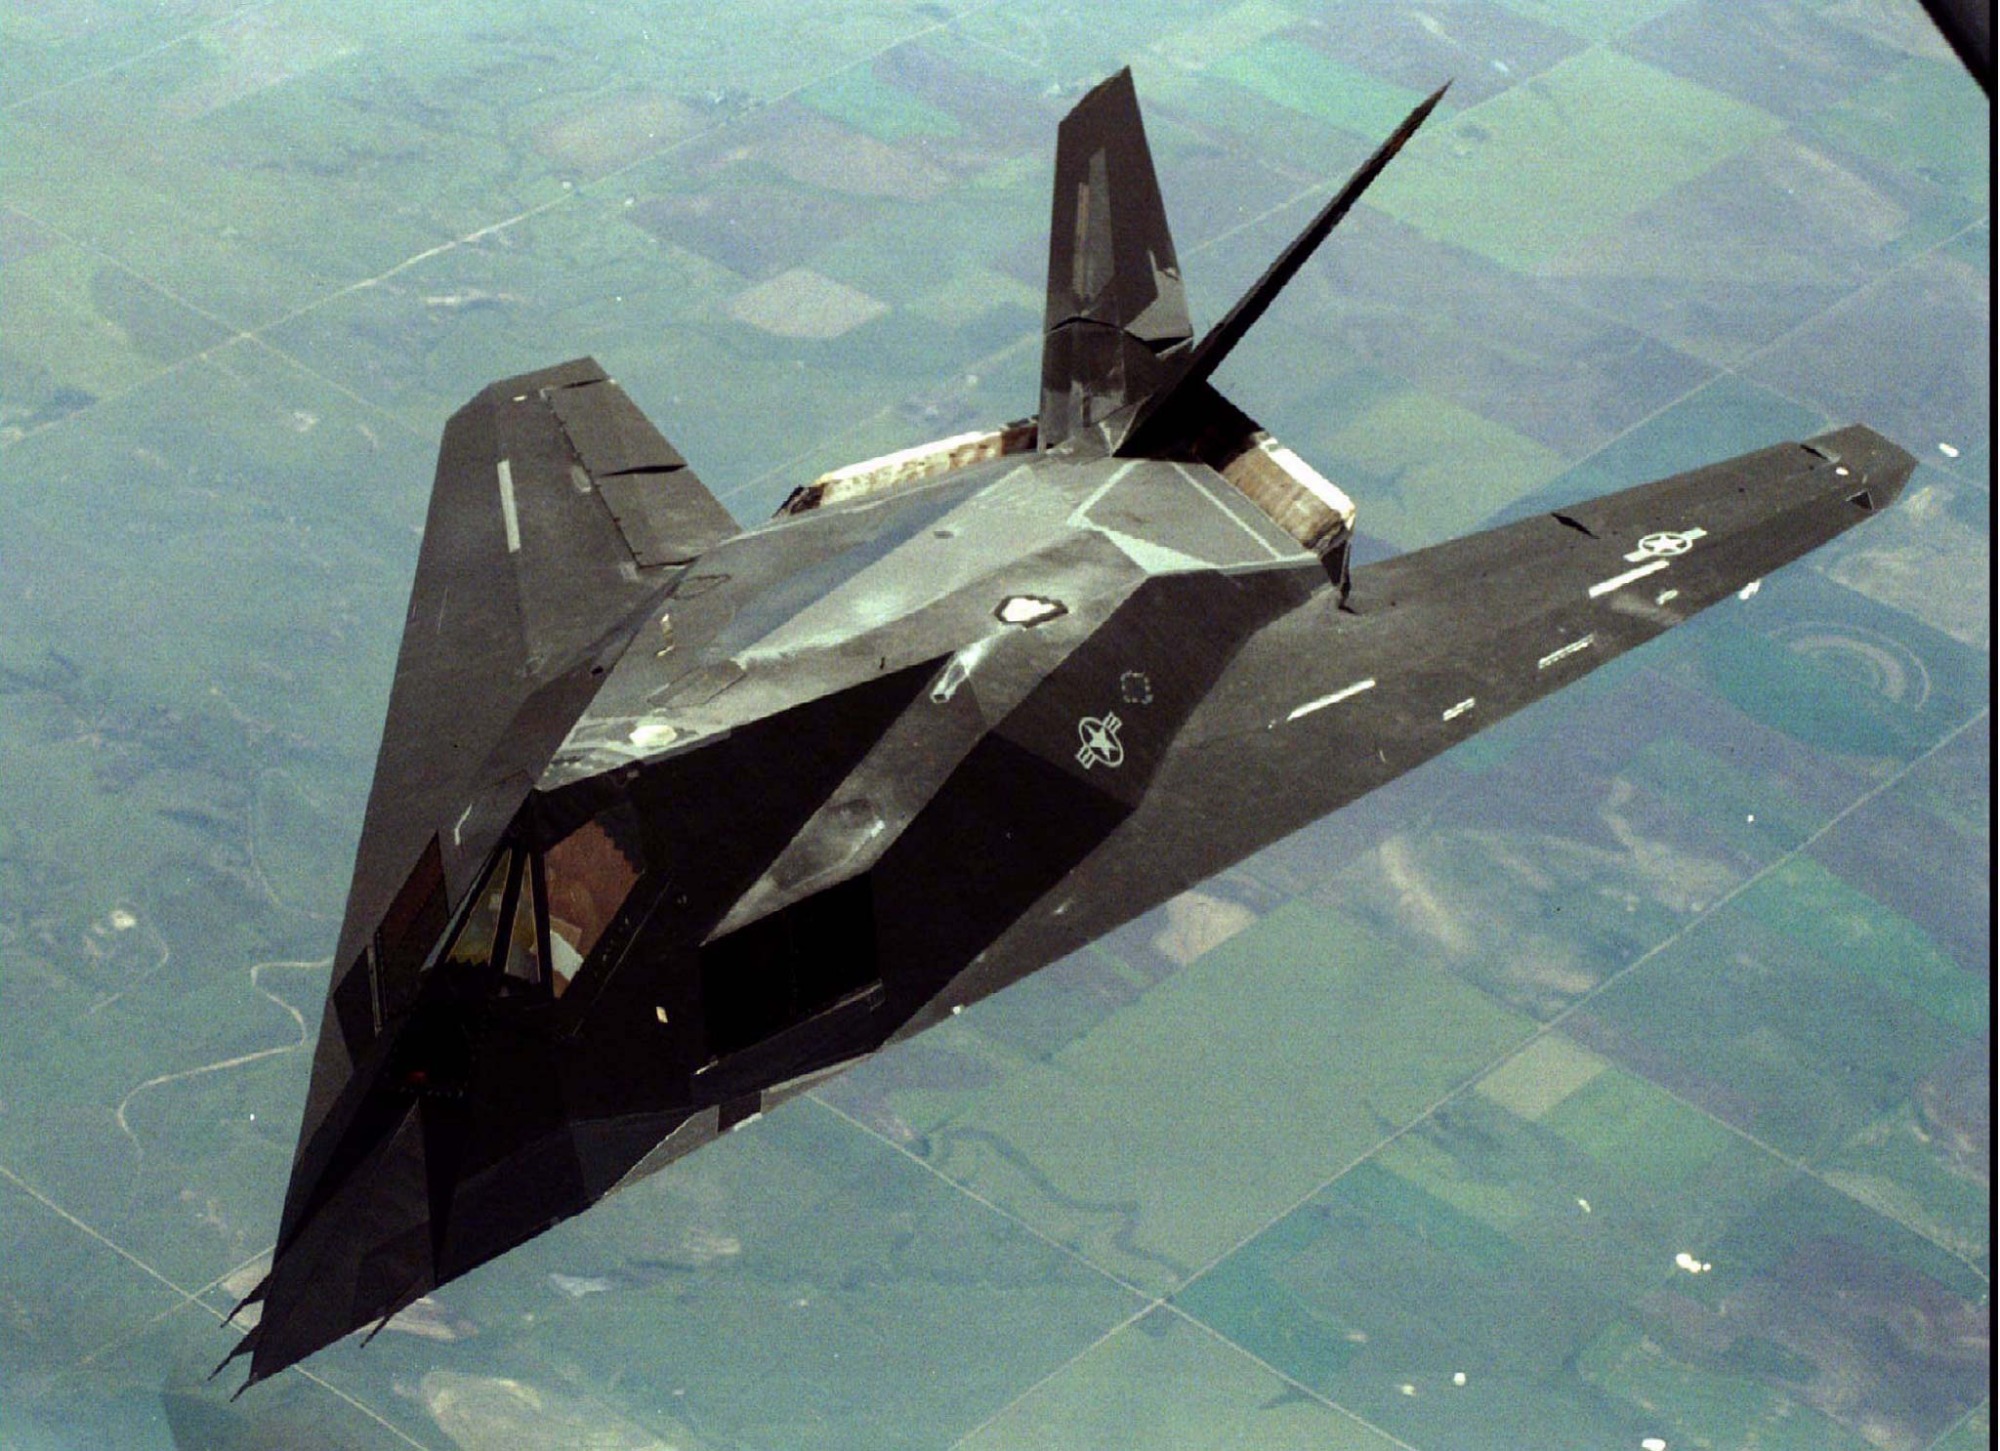 5 Stealth Weapons Have Made The U.S. Military Unstoppable | The